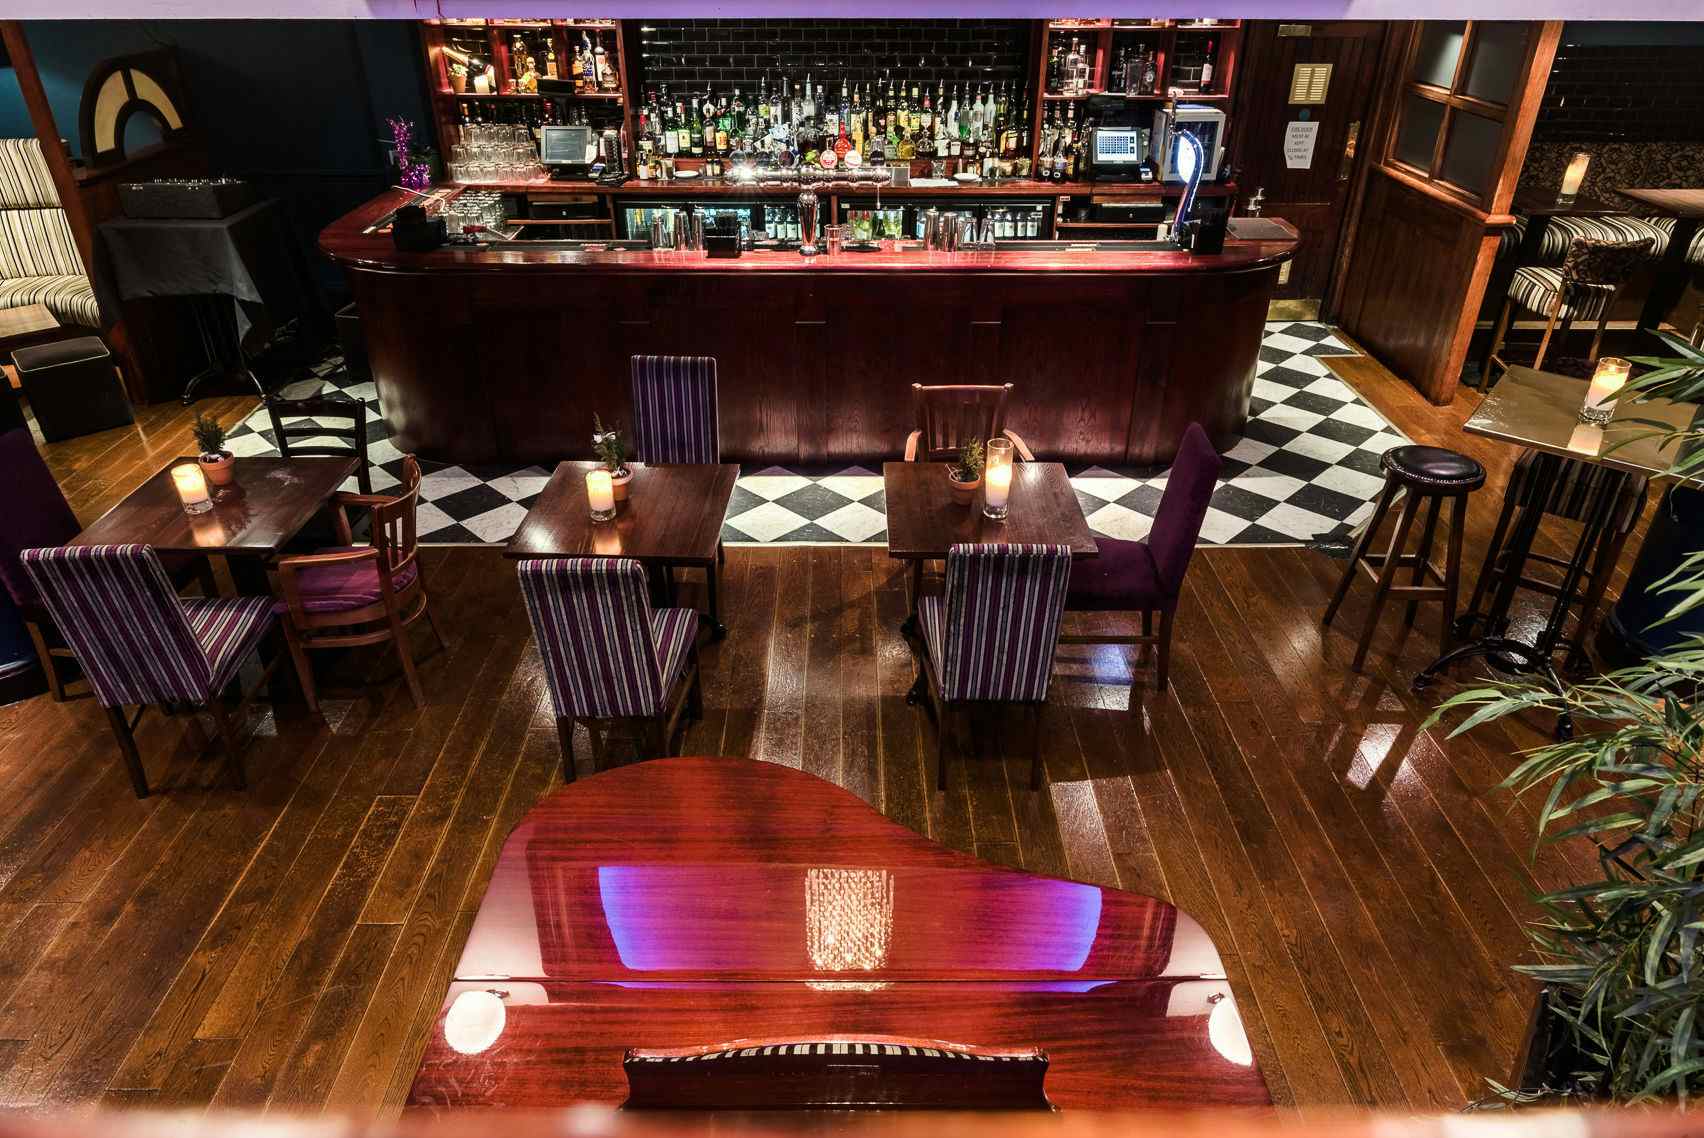 Book Basement at Henry's Cafe Bar Covent Garden. A London Venue for